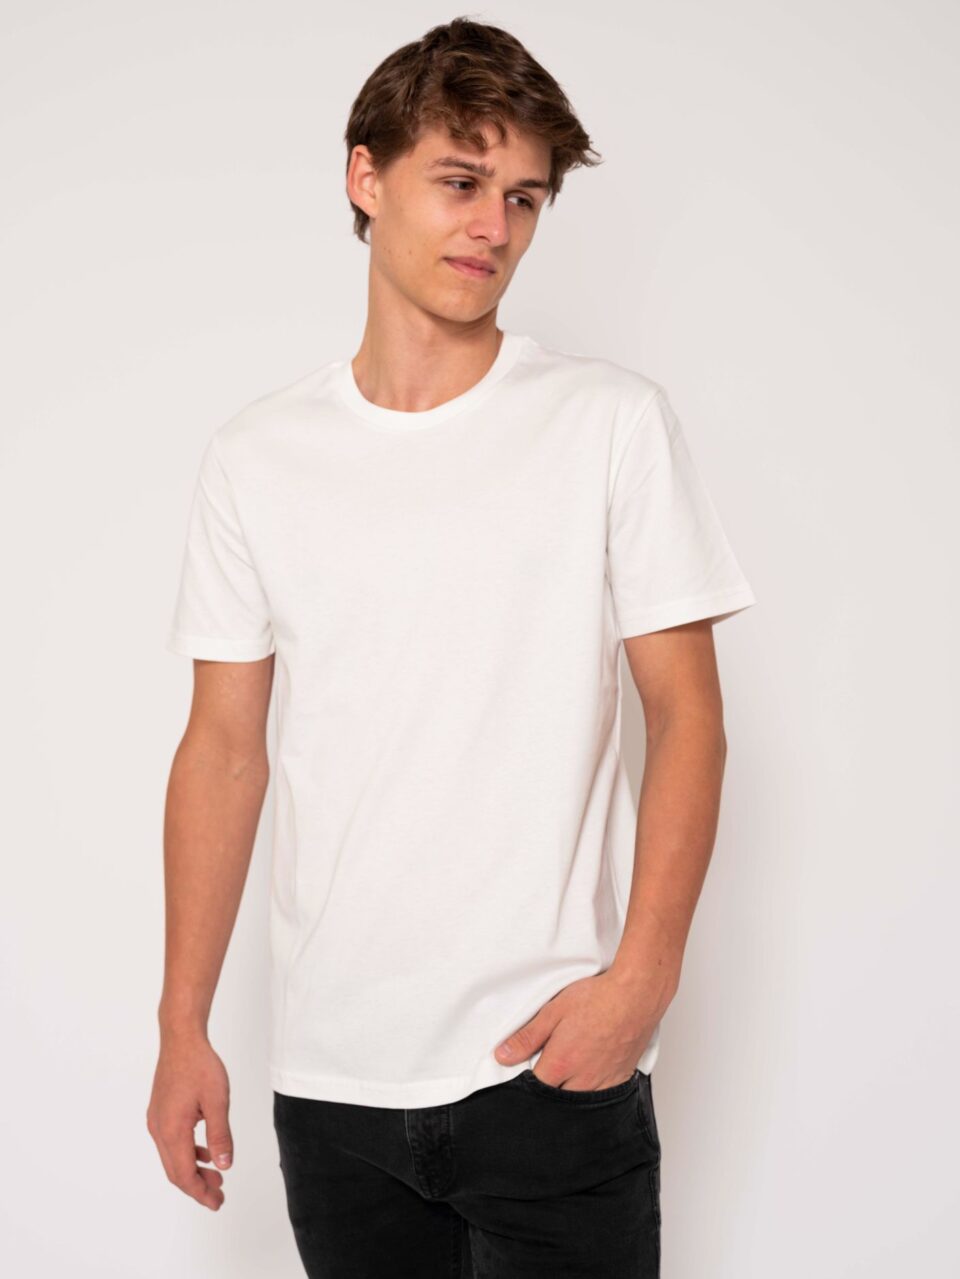 STROM_basic collection_off white_shirt.